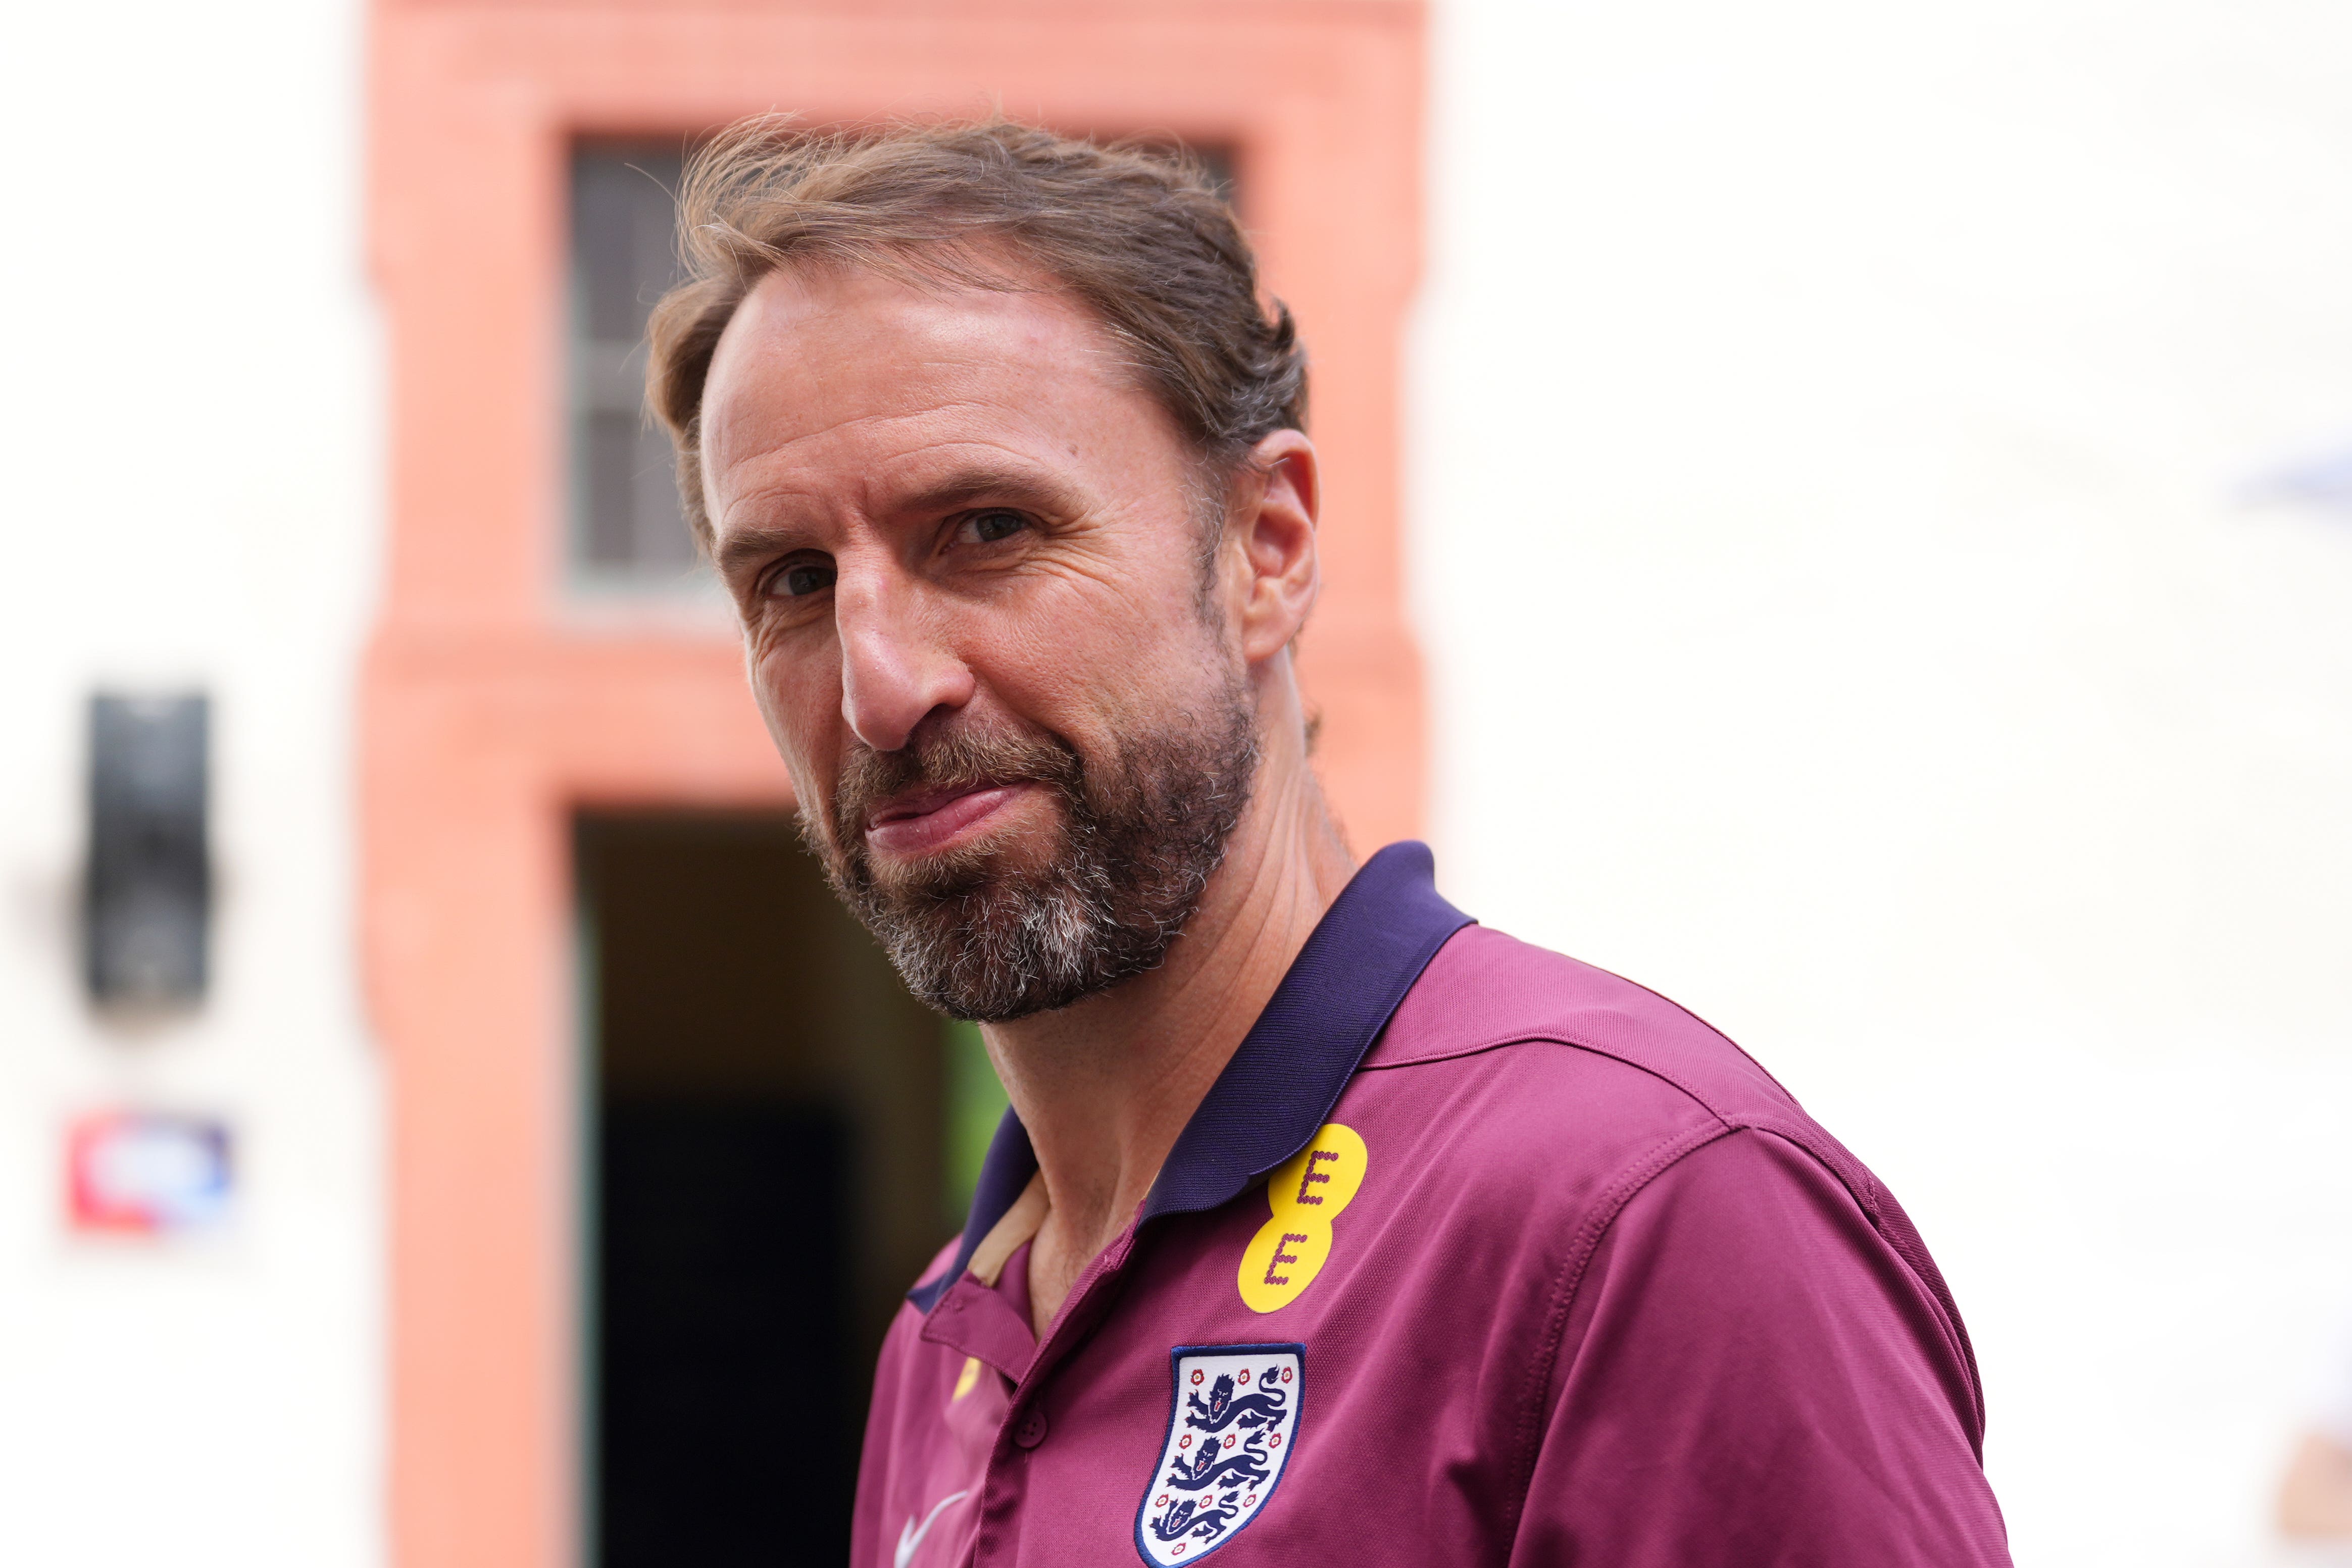 Manager Gareth Southgate says it is impossible for him to make a decision over his England future (Adam Davy/PA)